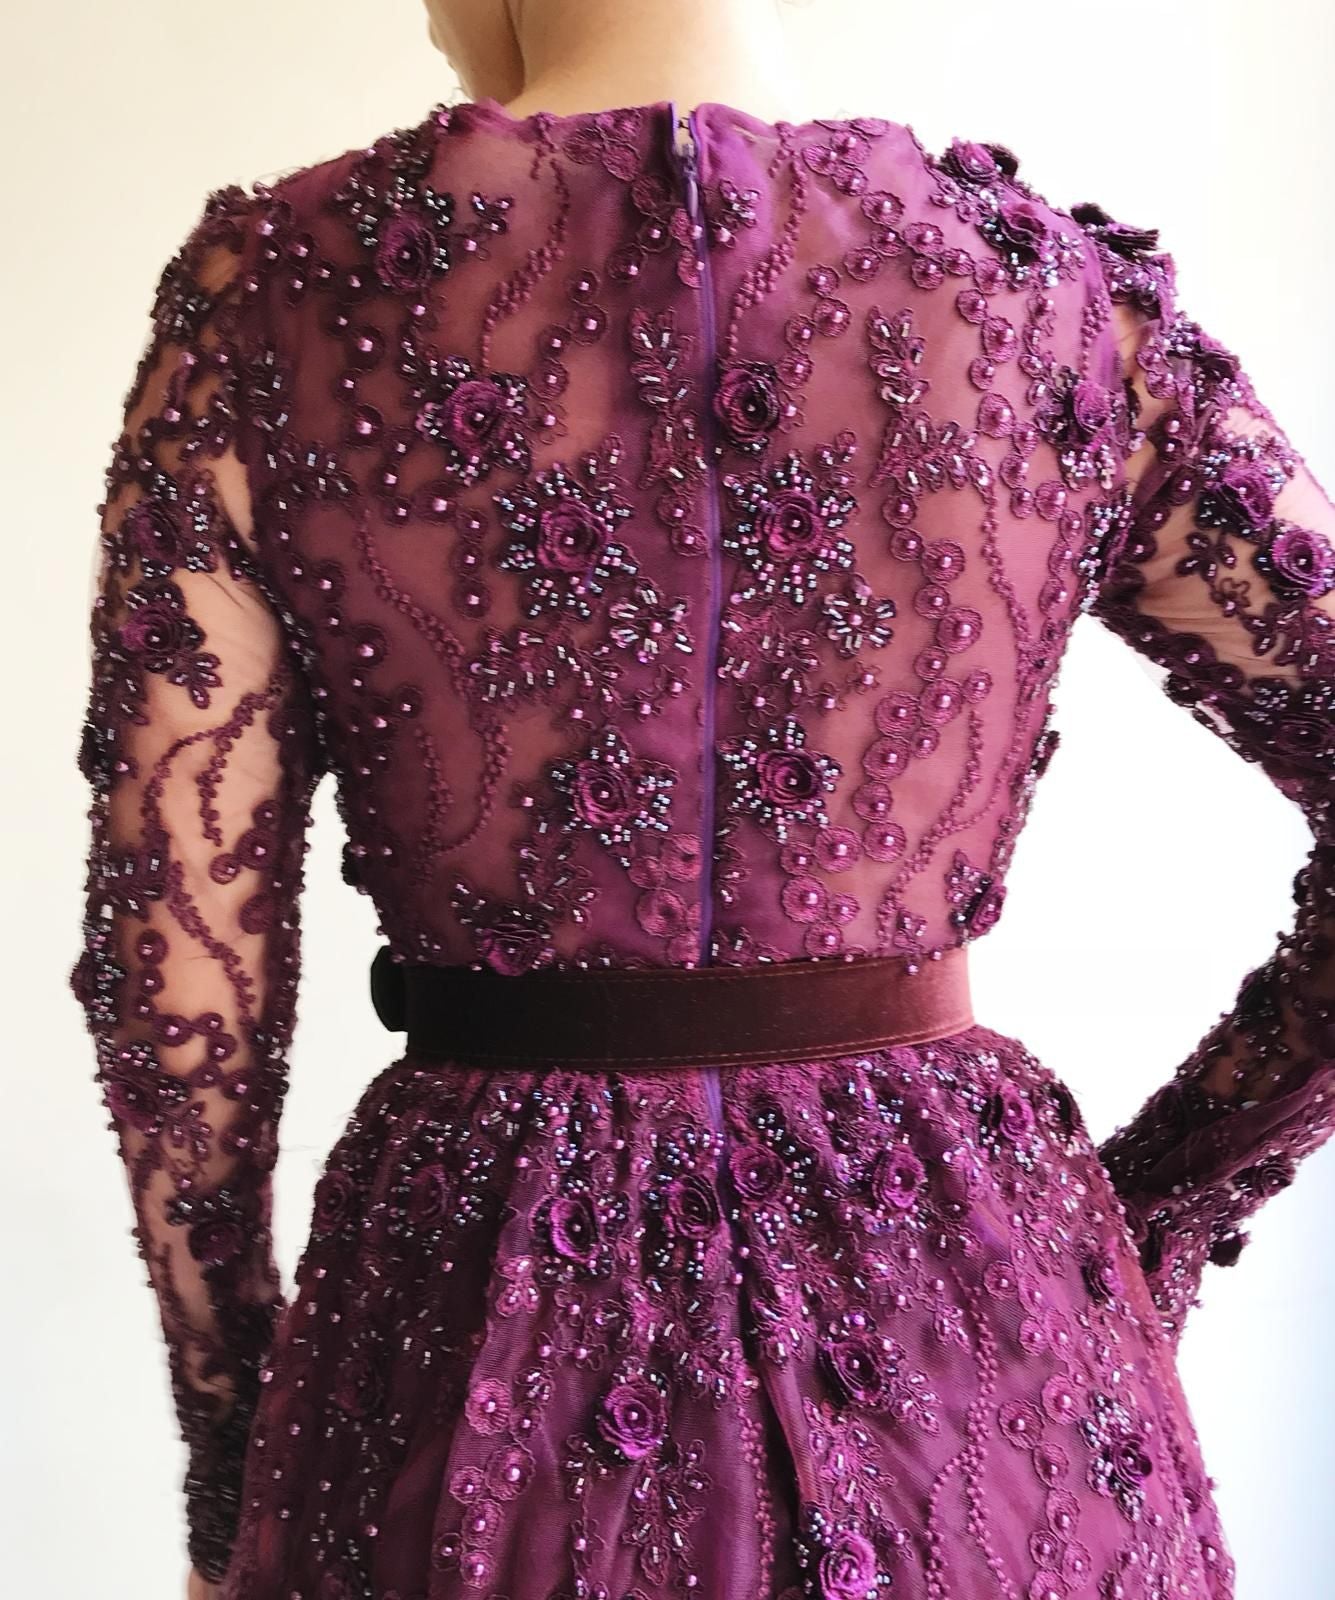 Purple A-Line dress with long sleeves, belt, embroidery and lace